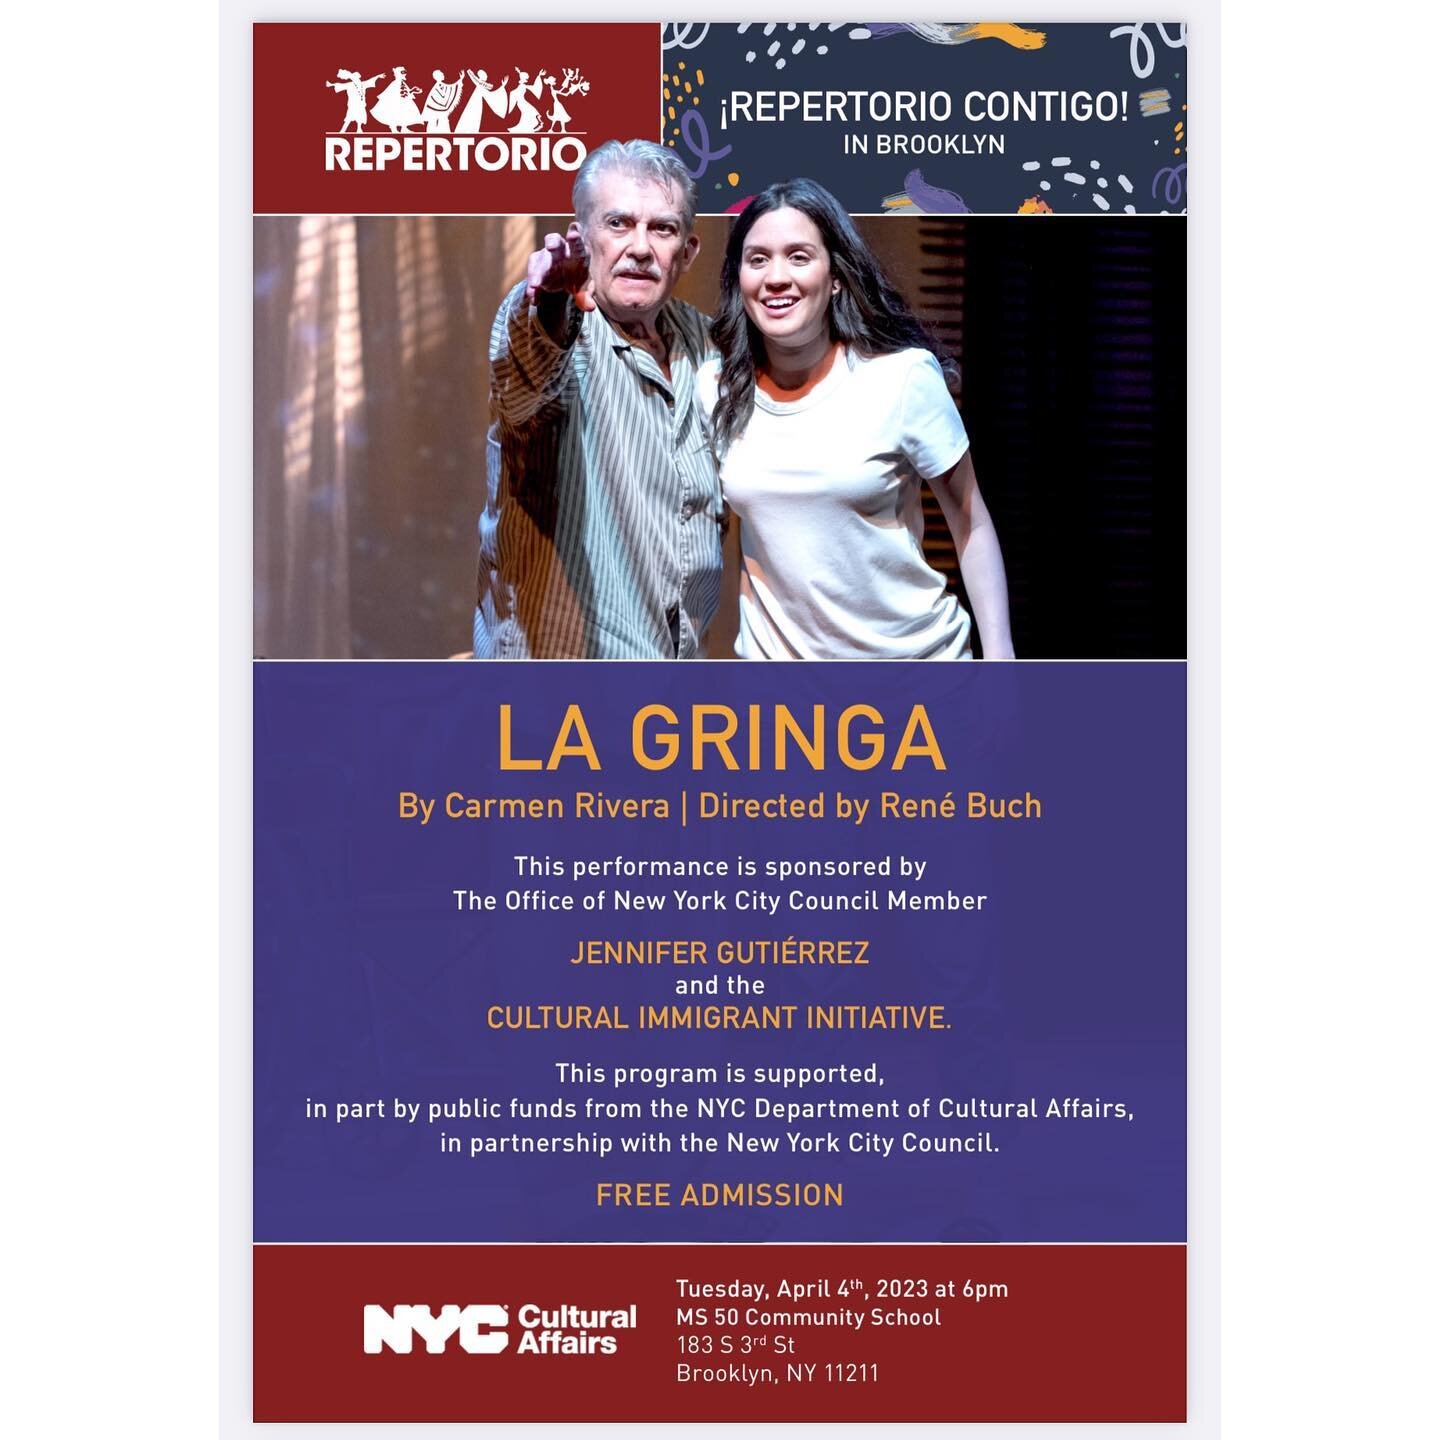 We&rsquo;re excited to be partnering with @cmjengutierrez , @nyculture &amp; @repertorionyc to bring you a special showing of LA GRINGA. This is a FREE event for the community on April 4th at 6pm.